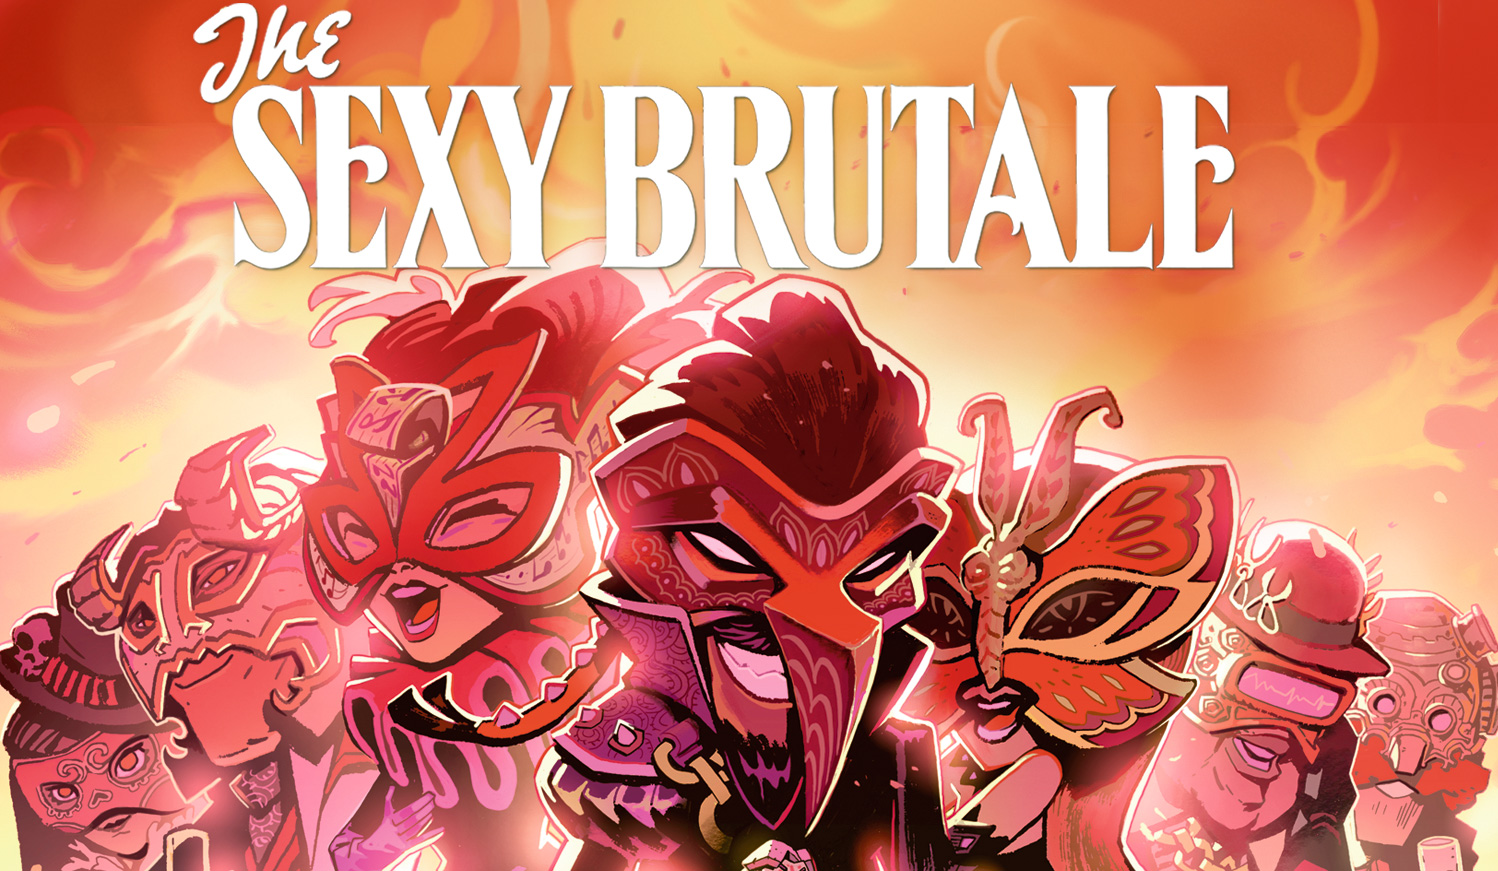 Review game Sexy Brutale detective in the best traditions of Agatha Christie